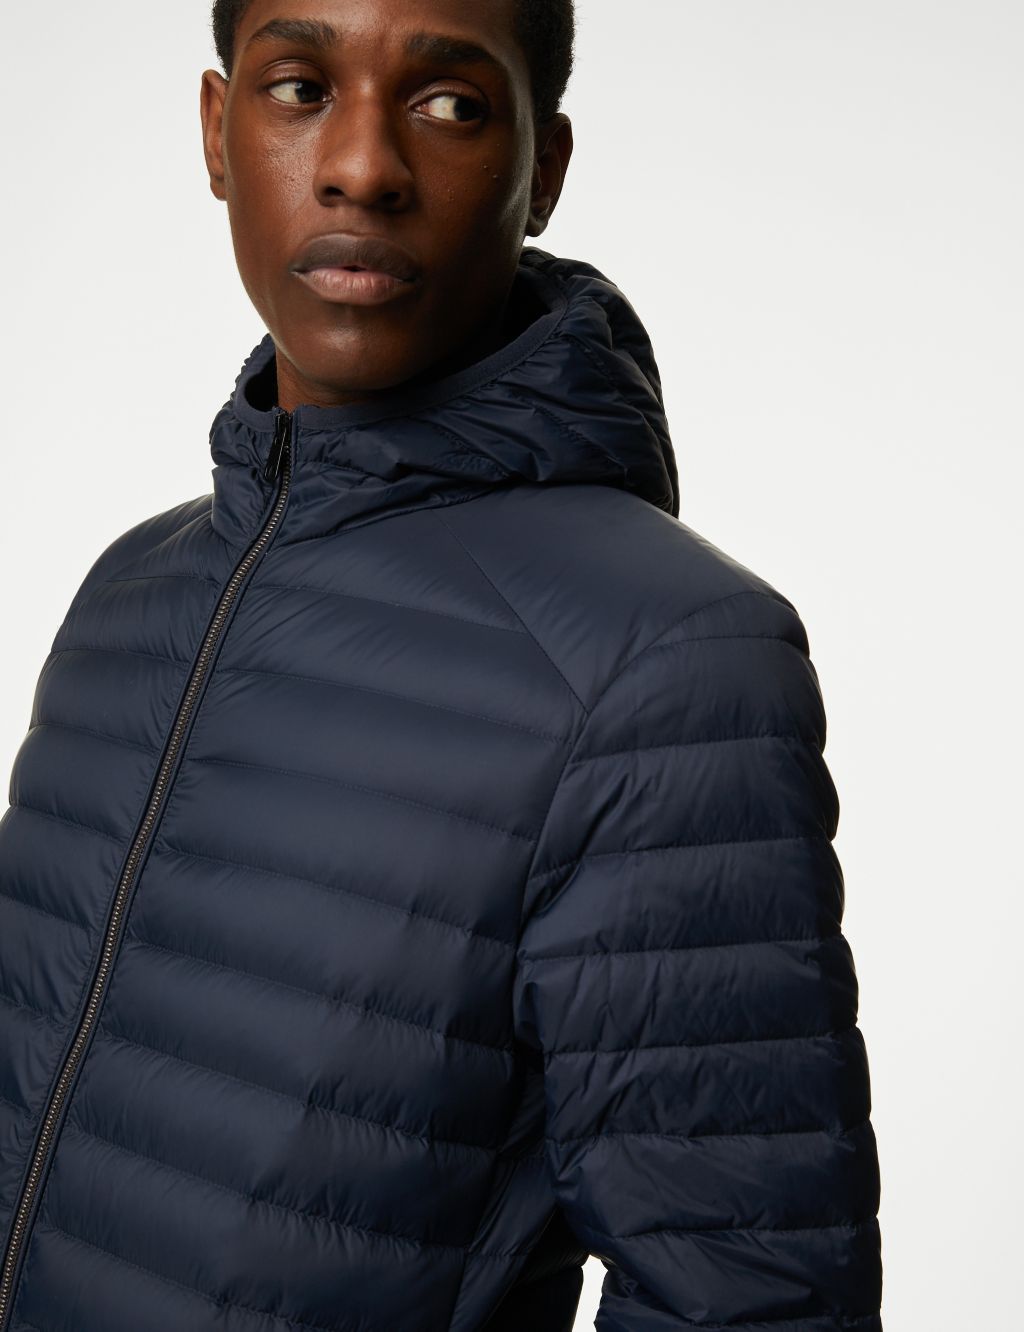 Feather and Down Jacket with Stormwear™ image 3